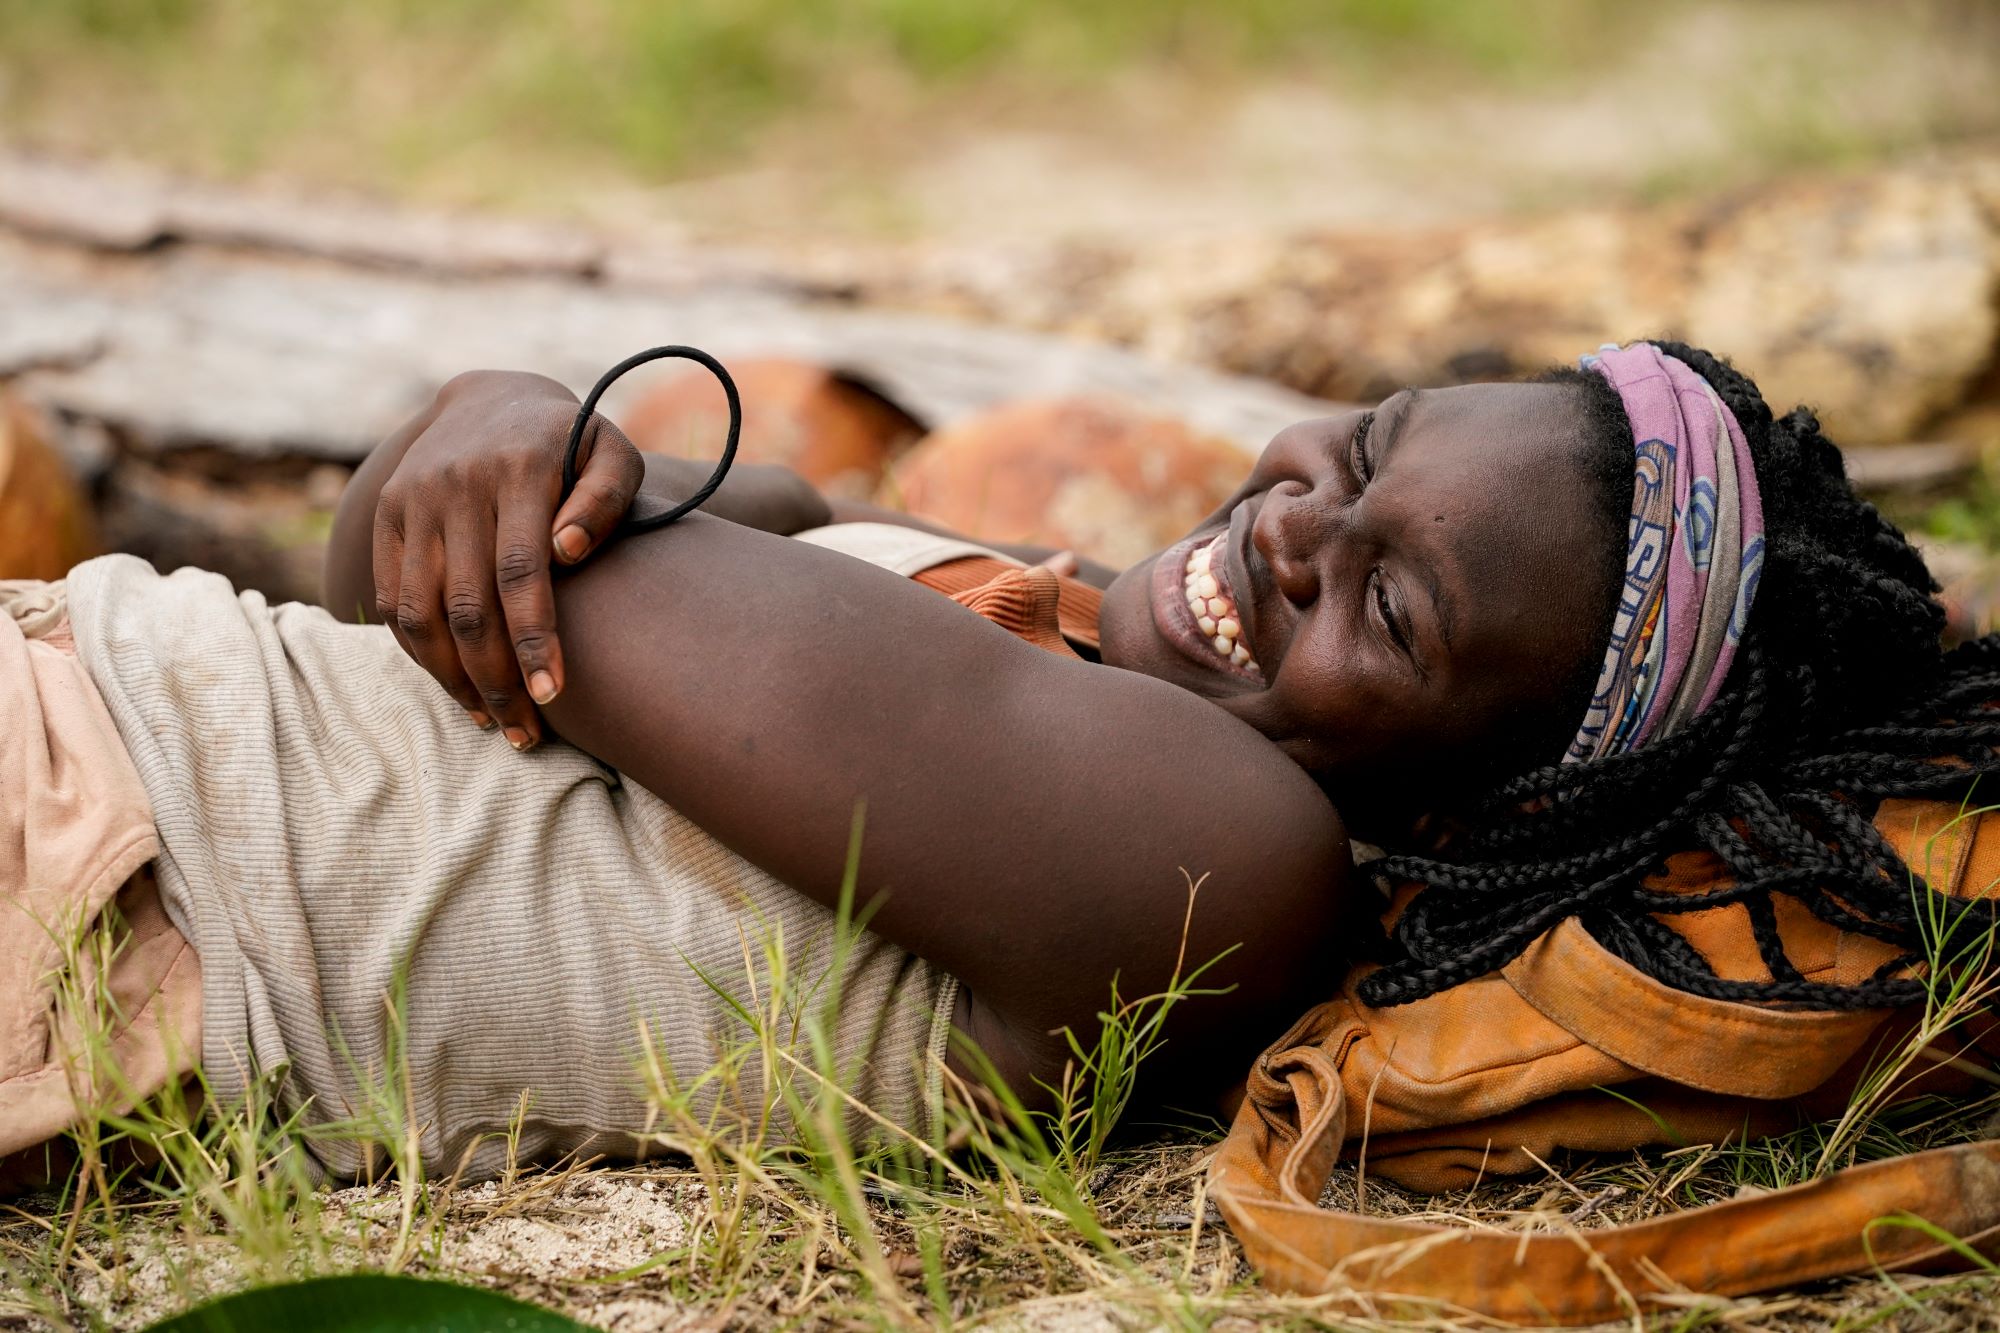 Maryanne Oketch, who won 'Survivor' Season 42 ahead of season 43, which isn't new tonight, wears a gray tank top, tan shorts, and a purple buff on her head while laying on the ground.